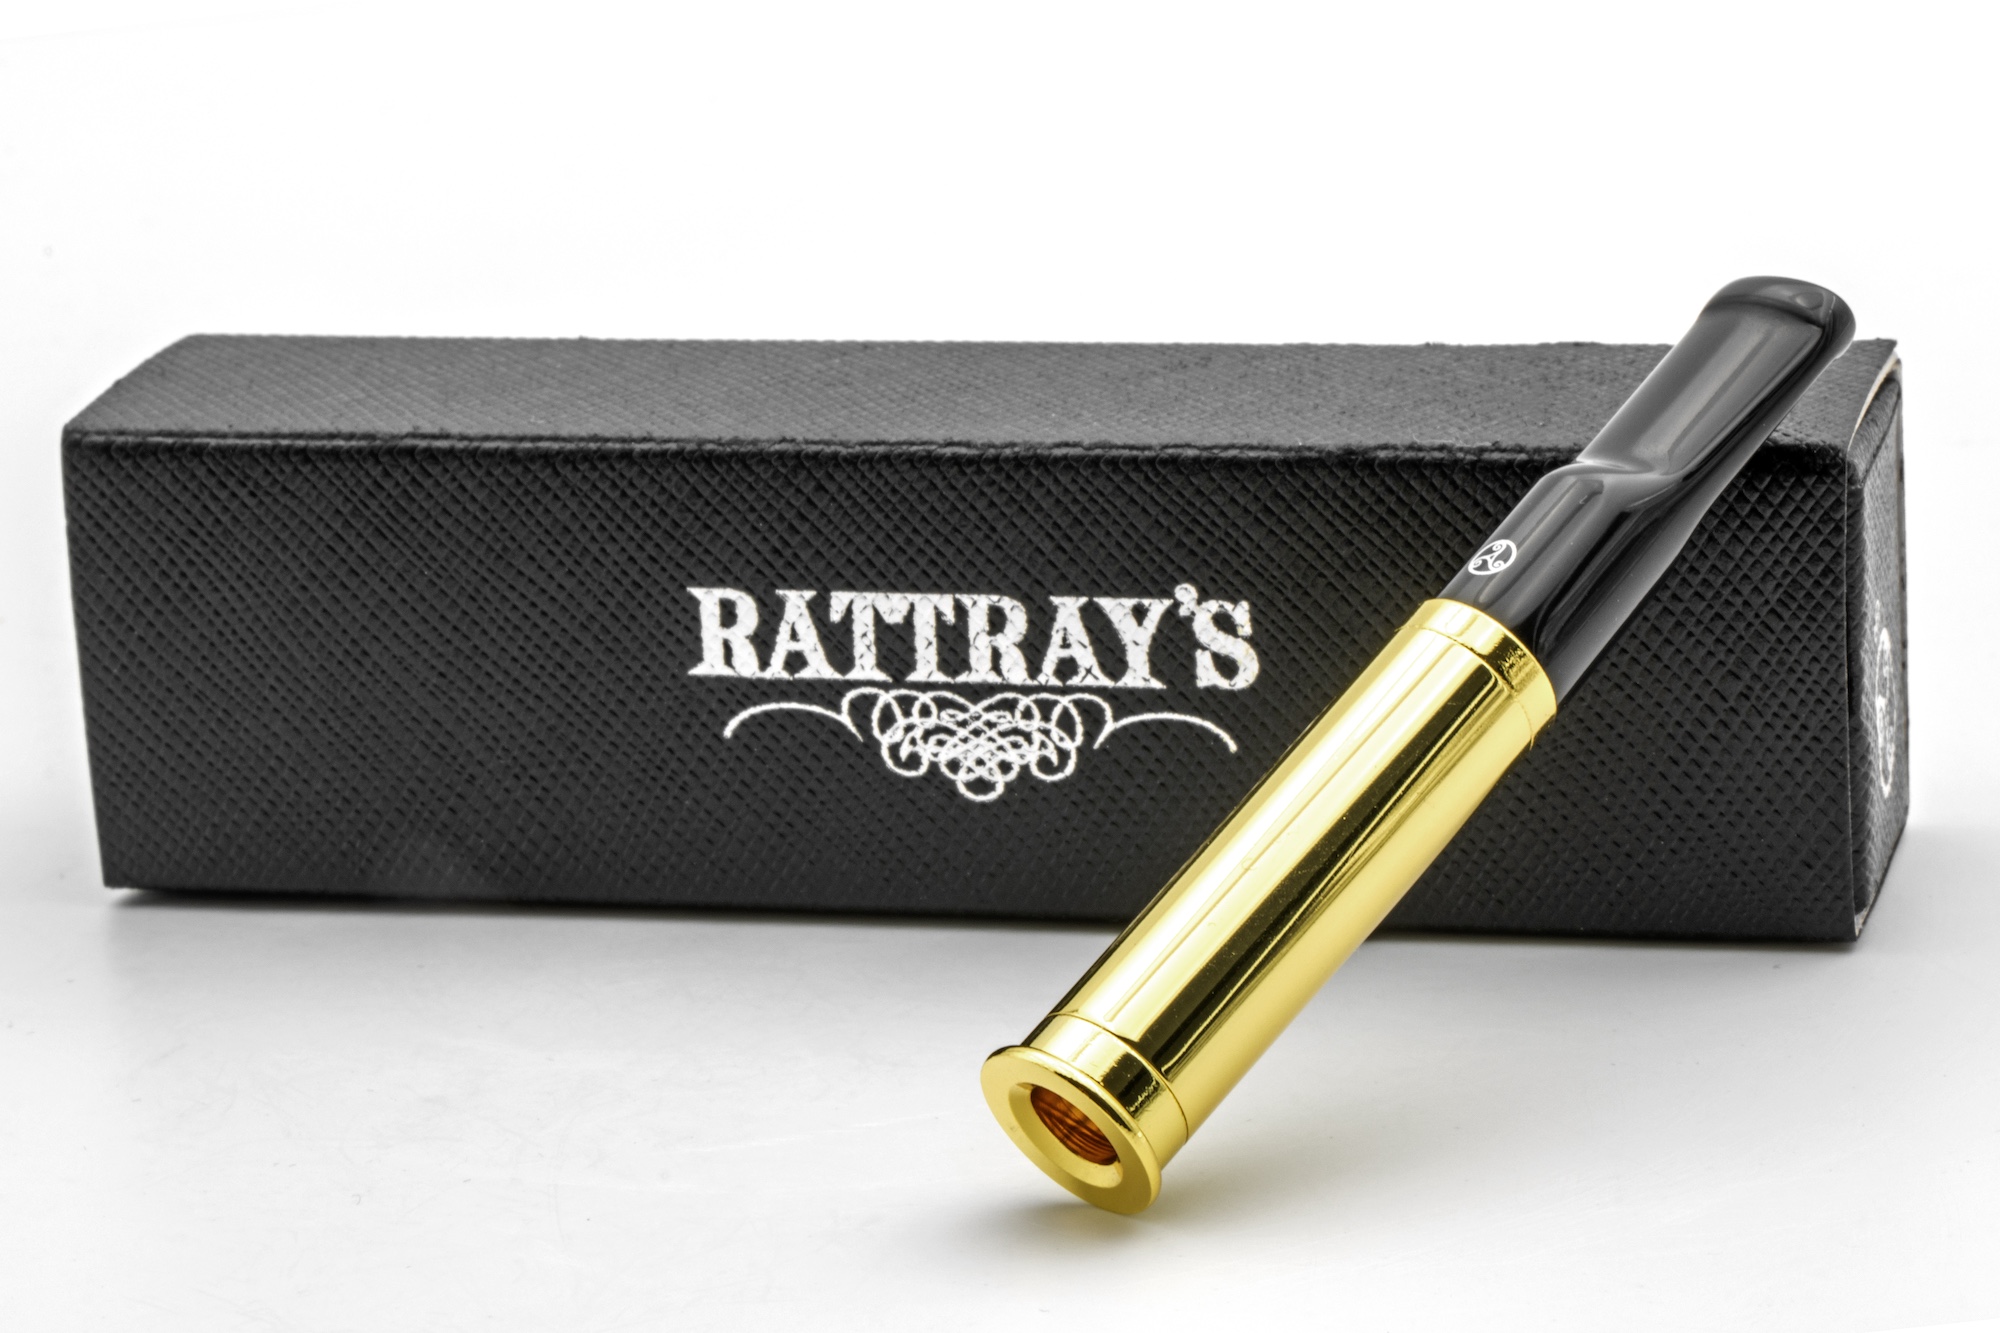 Rattray's Tuby Gold